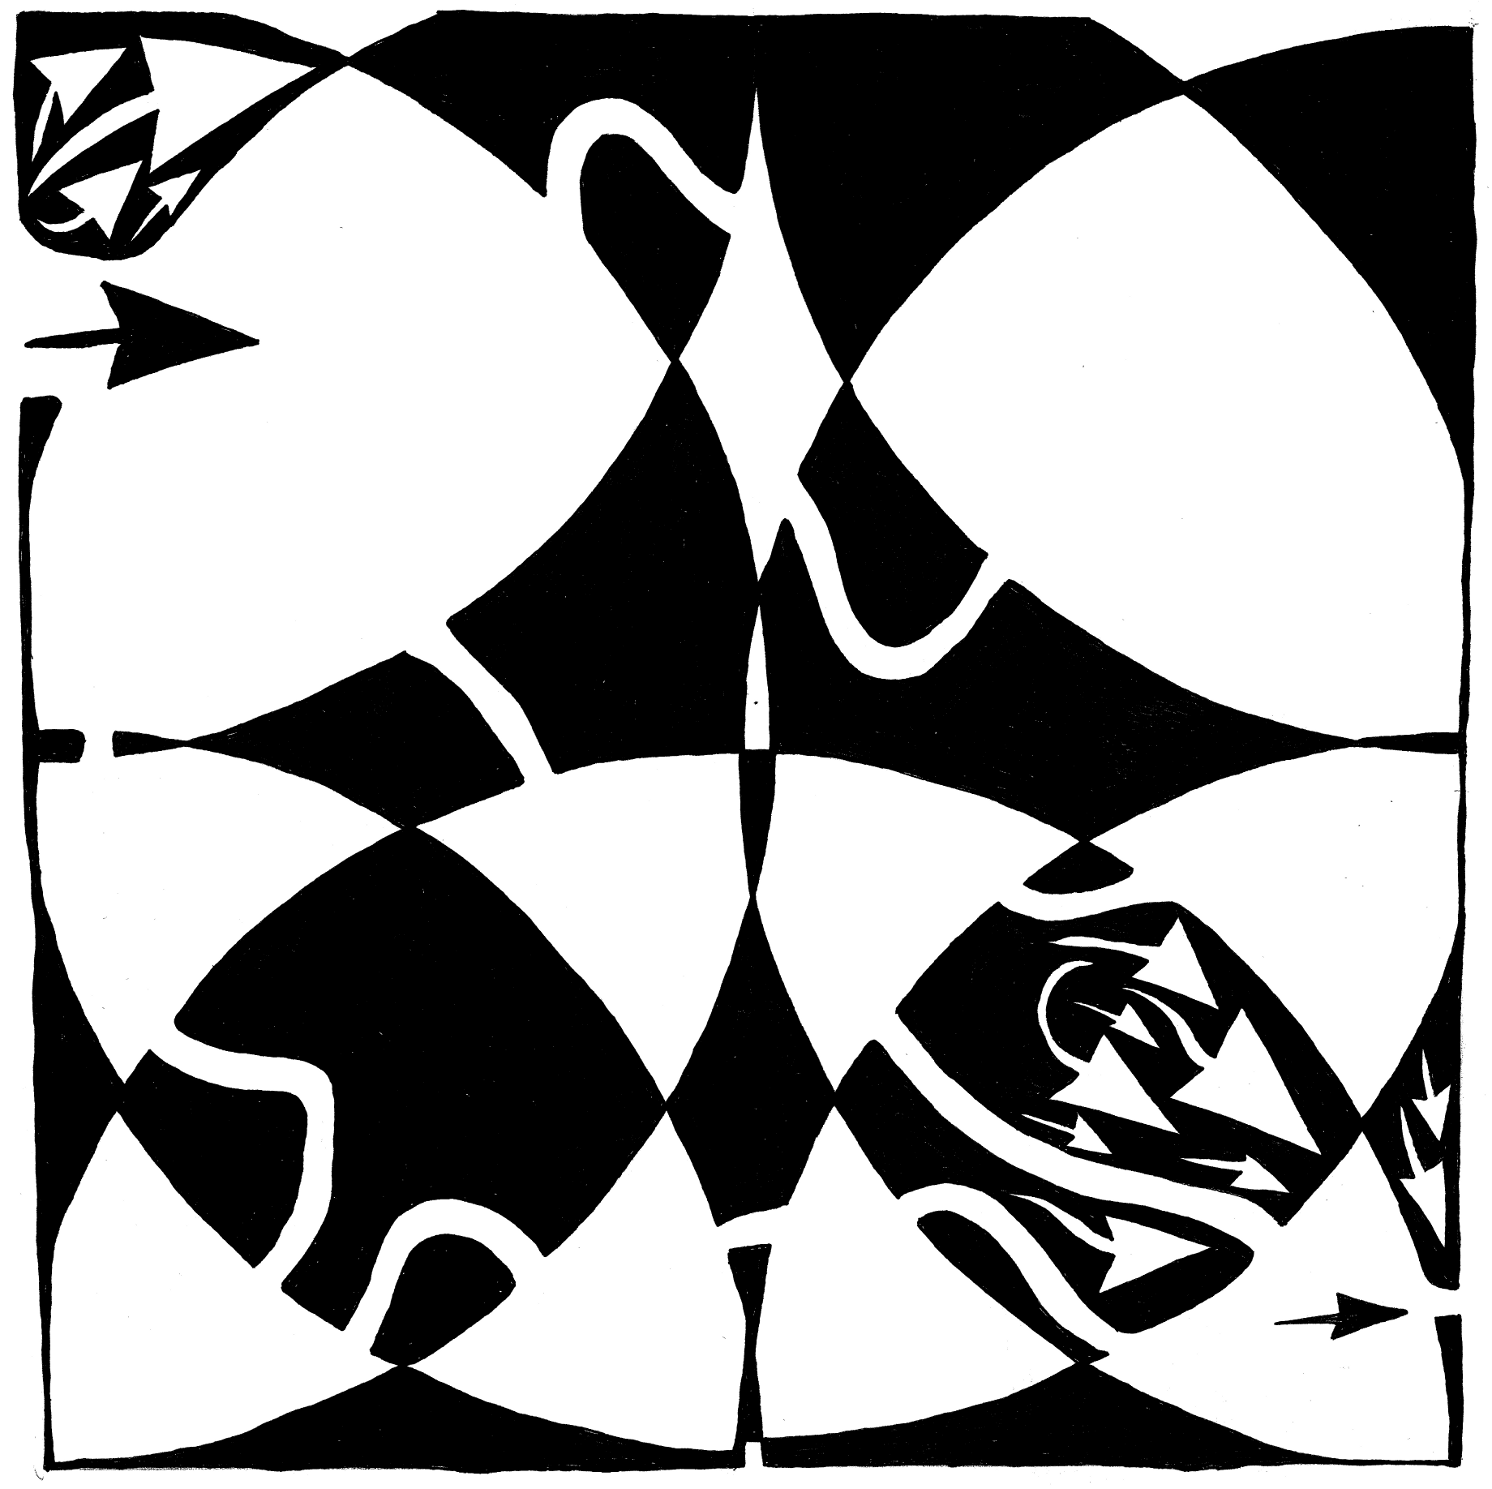 Rorschach maze art by Yonatan Frimer What do you see in this maze?